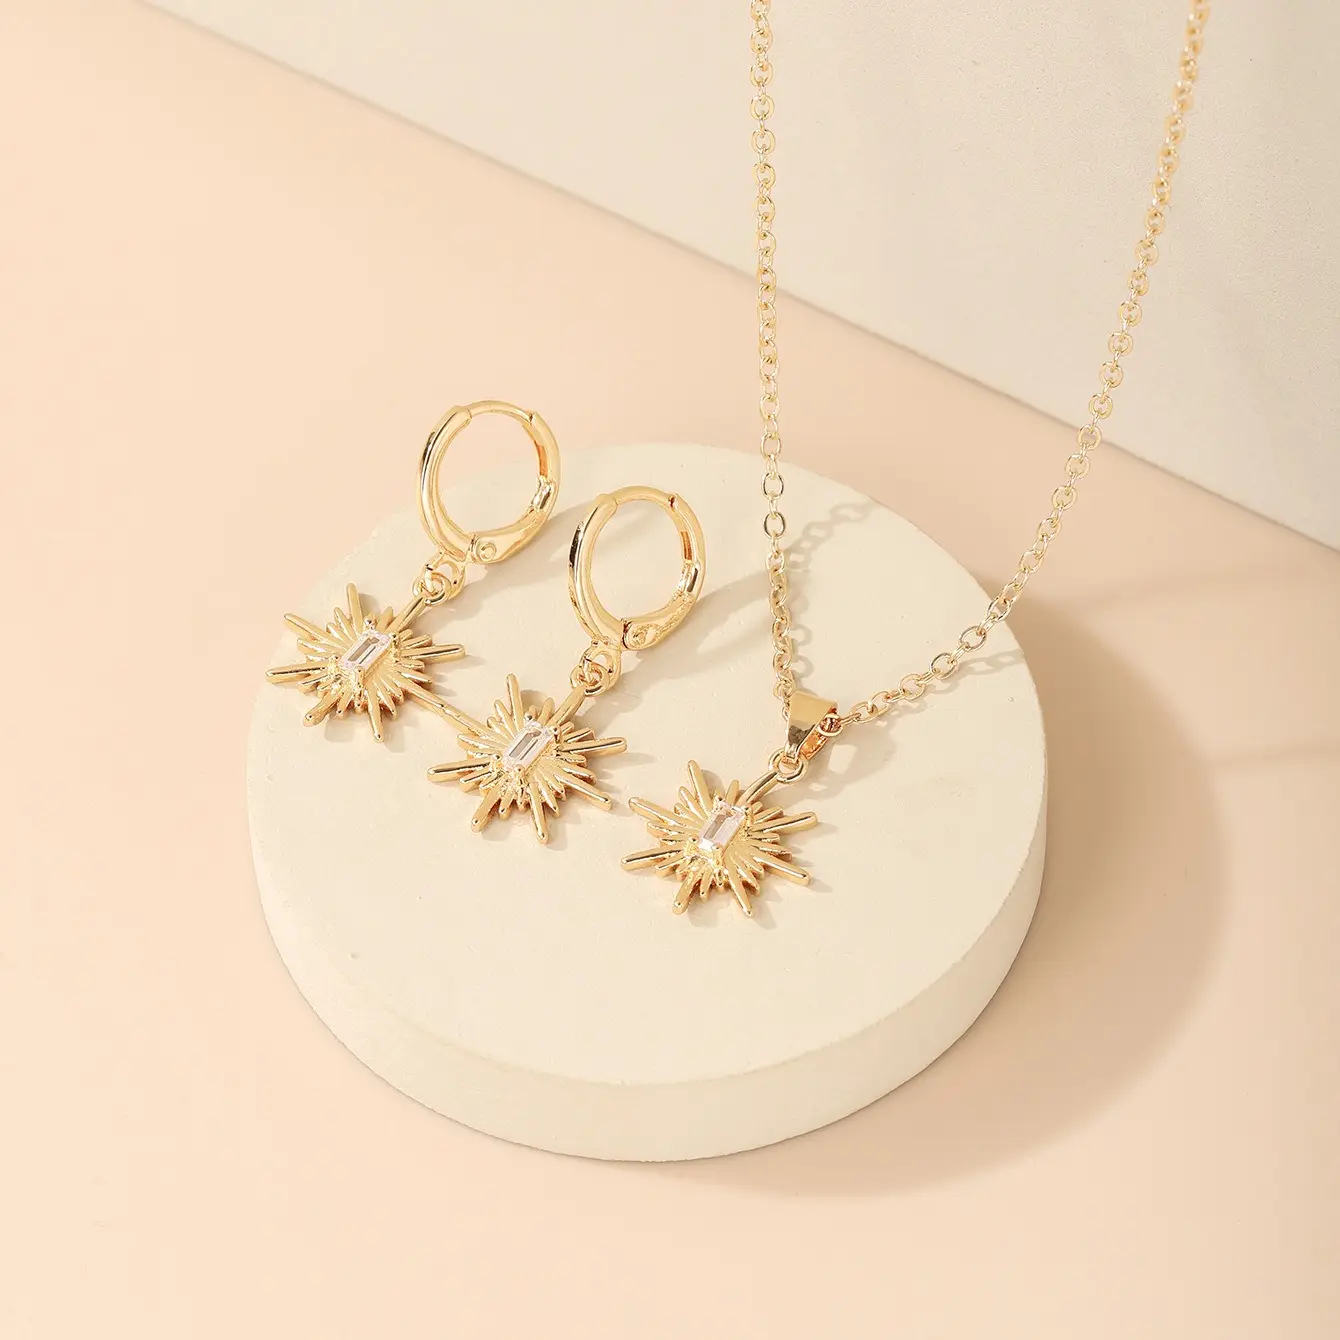 Necklace And Earring Sets 2021 New Arrival Gold Plated Jewelry Sets Retro Sun Fashion Pendant Earrings Necklace Set